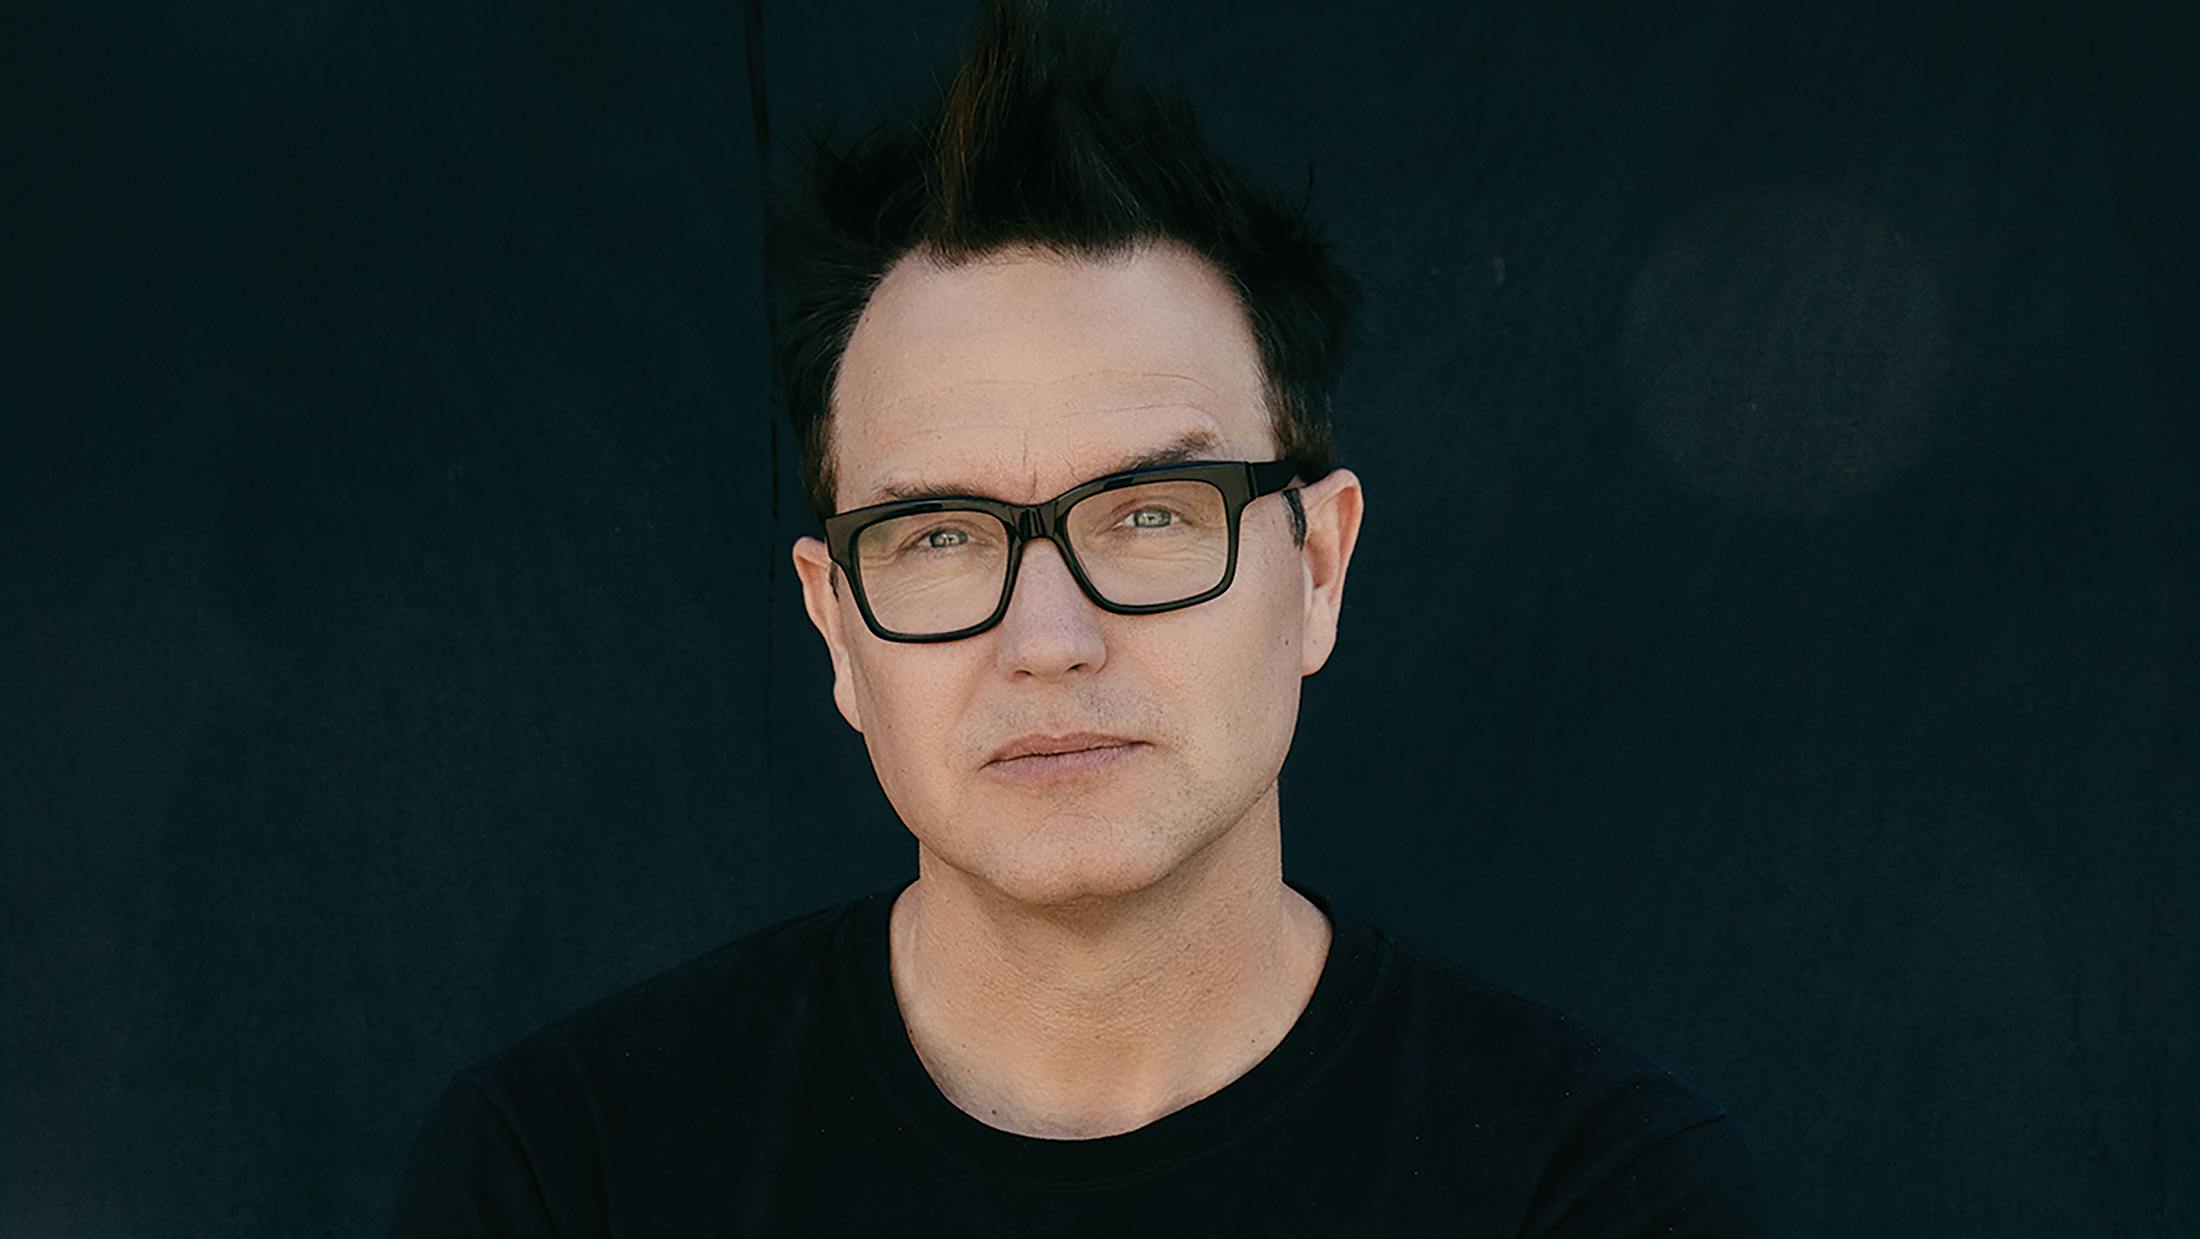 Mark Hoppus posts update on cancer battle: "This week I’ll take a test that may very well determine if I live or die"